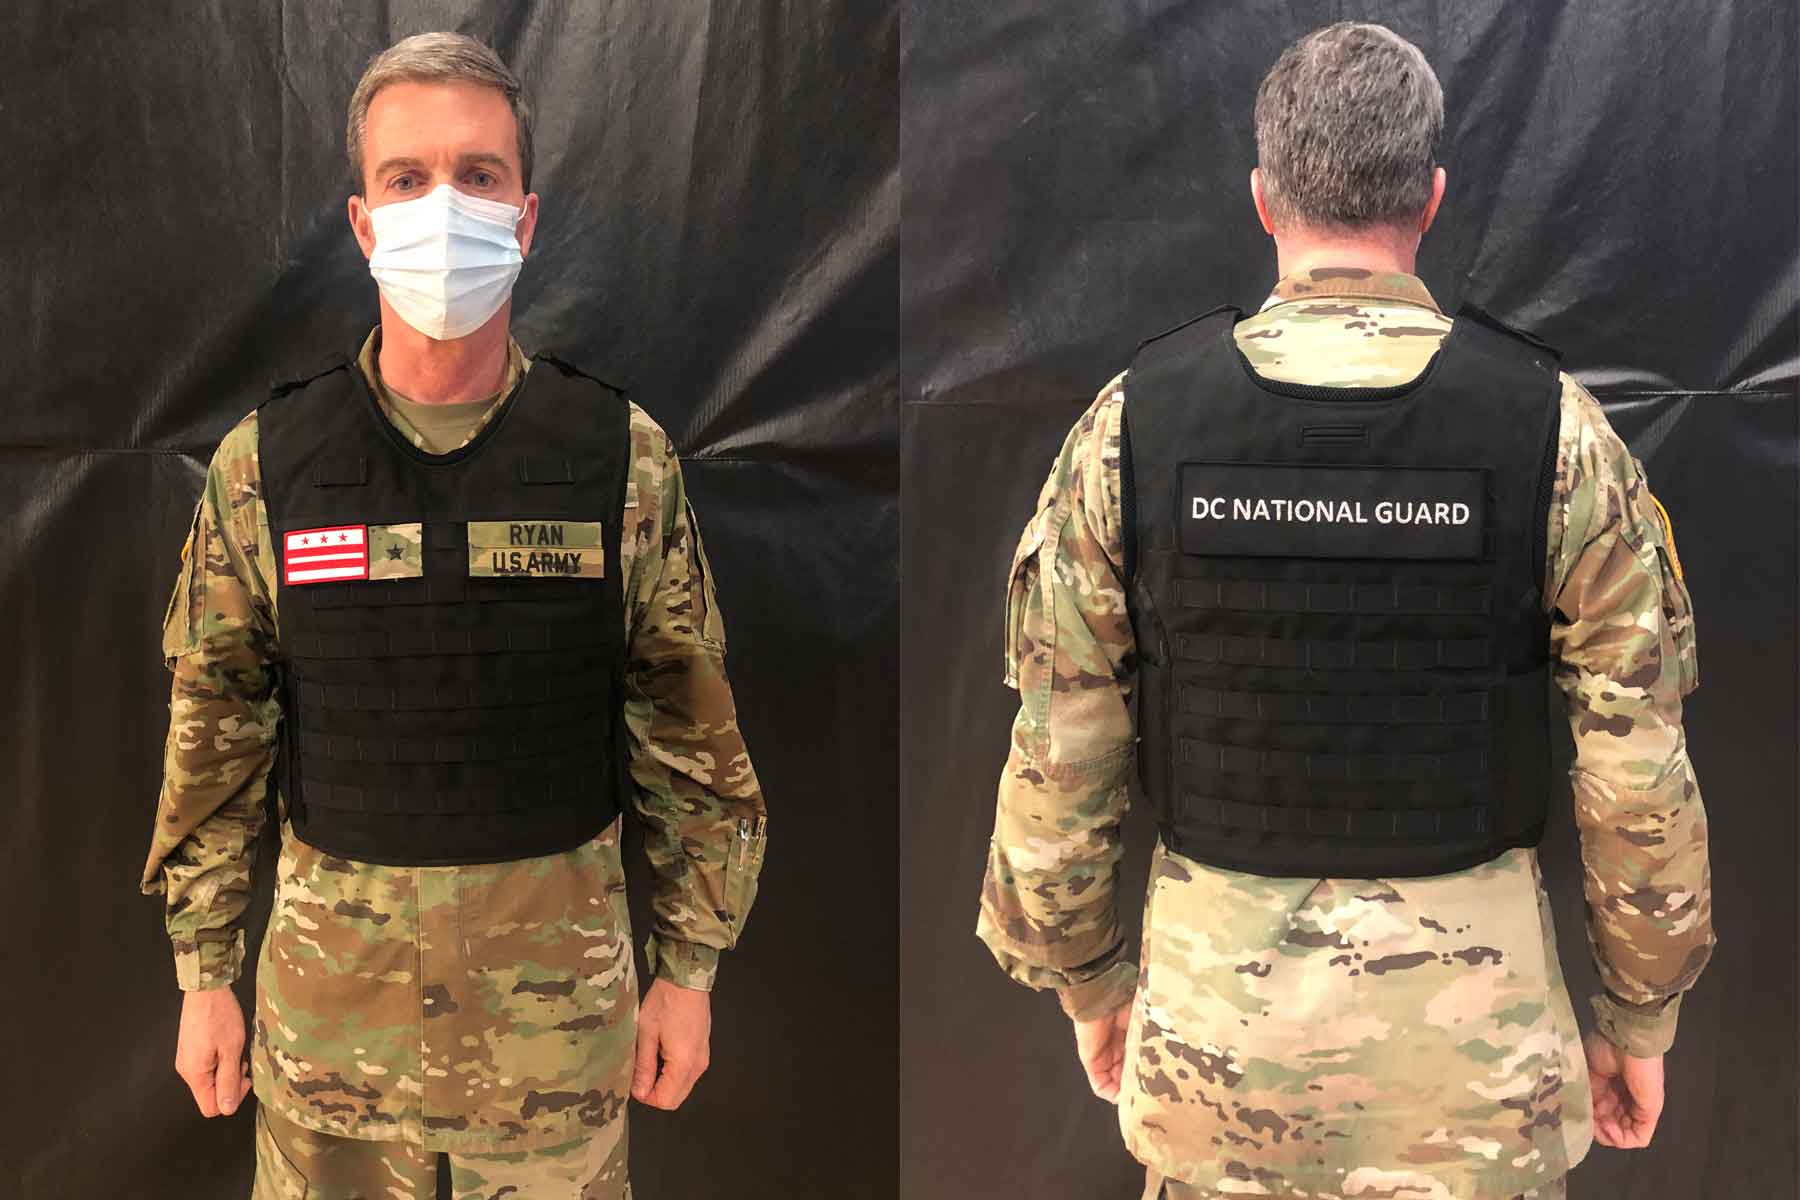 National Guard Wear Black ID Vests to Stand from Police During DC Protests | Military.com